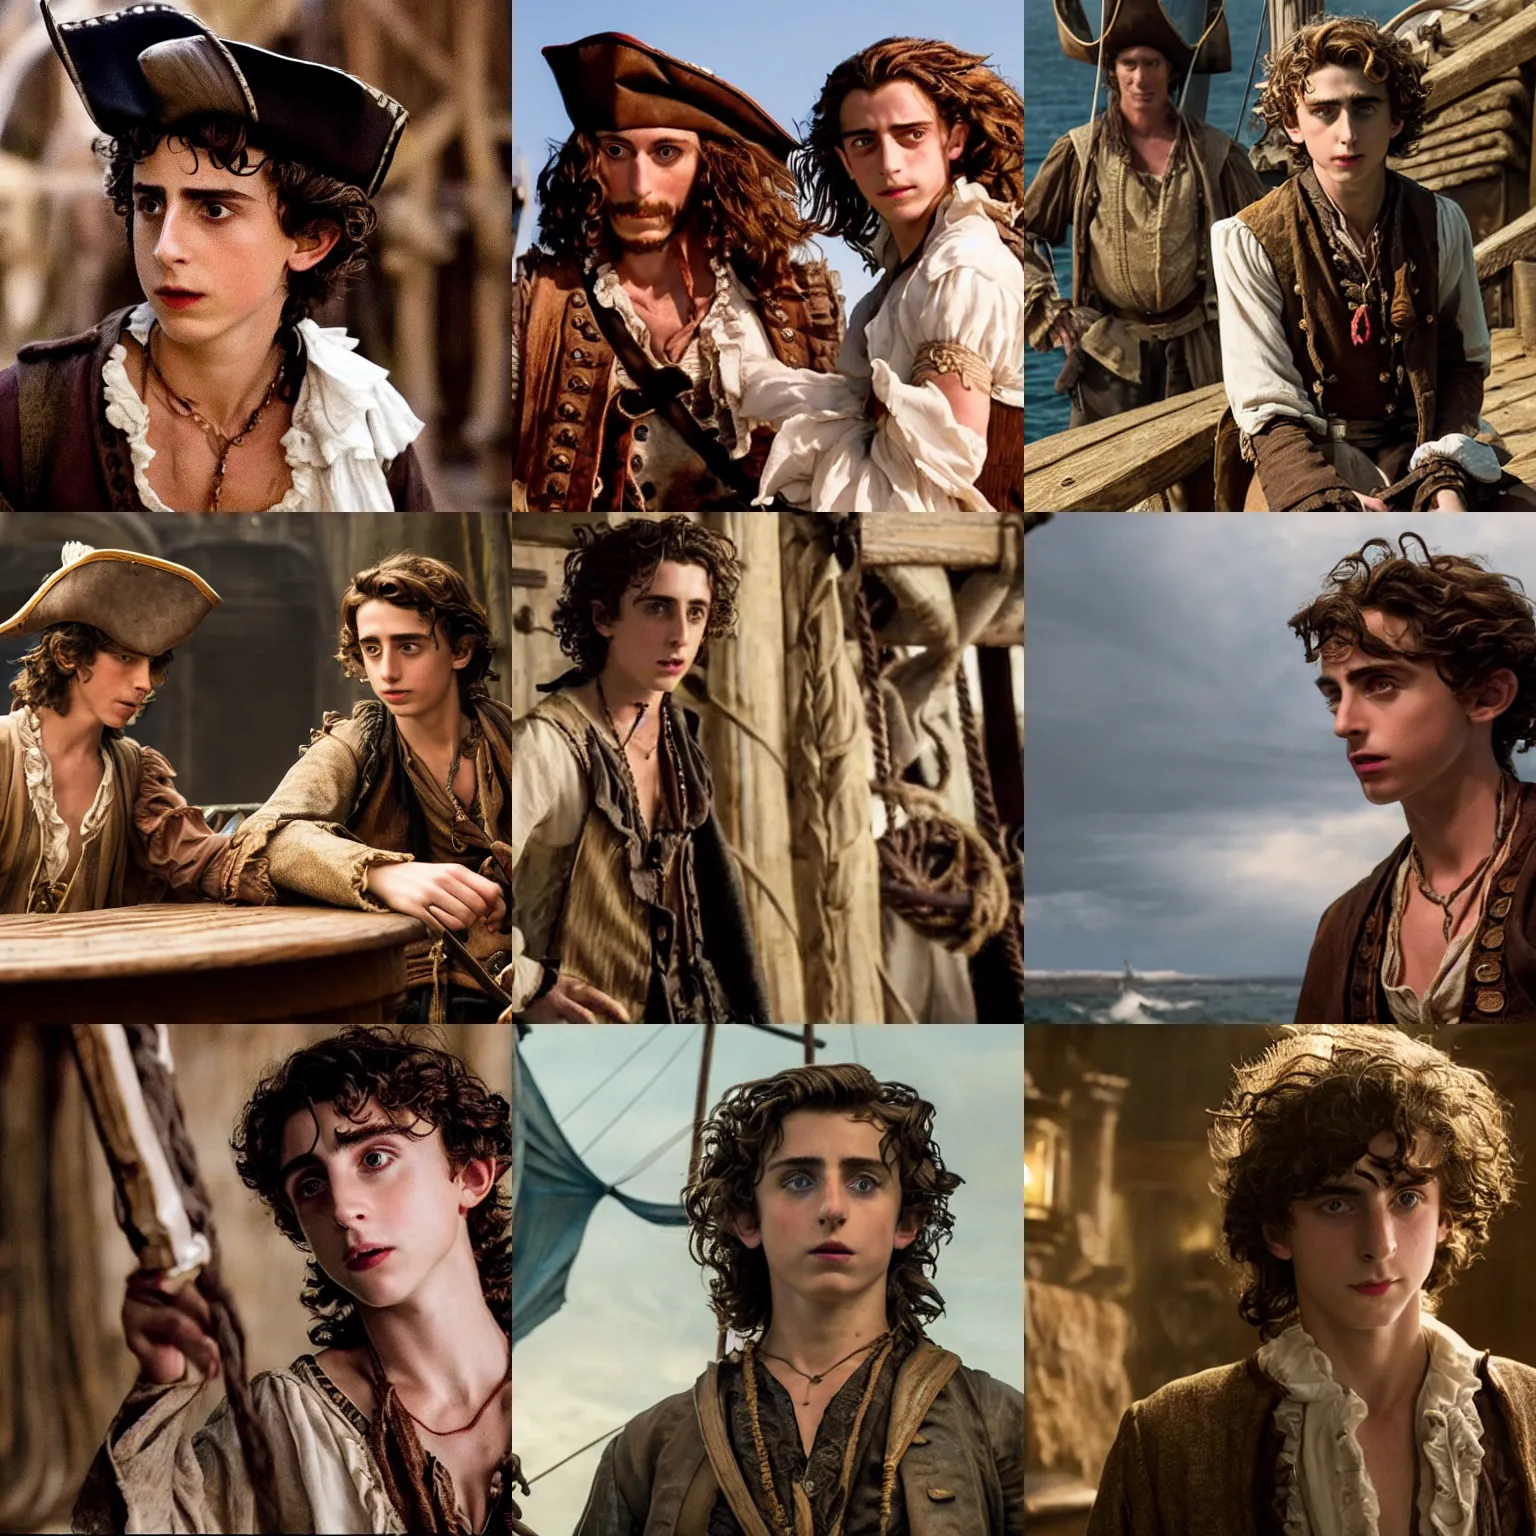 Prompt: still from a pirate movie starring Timothee Chalamet as Guybrush Threepwood, directed by Steven Spielberg, shot on film